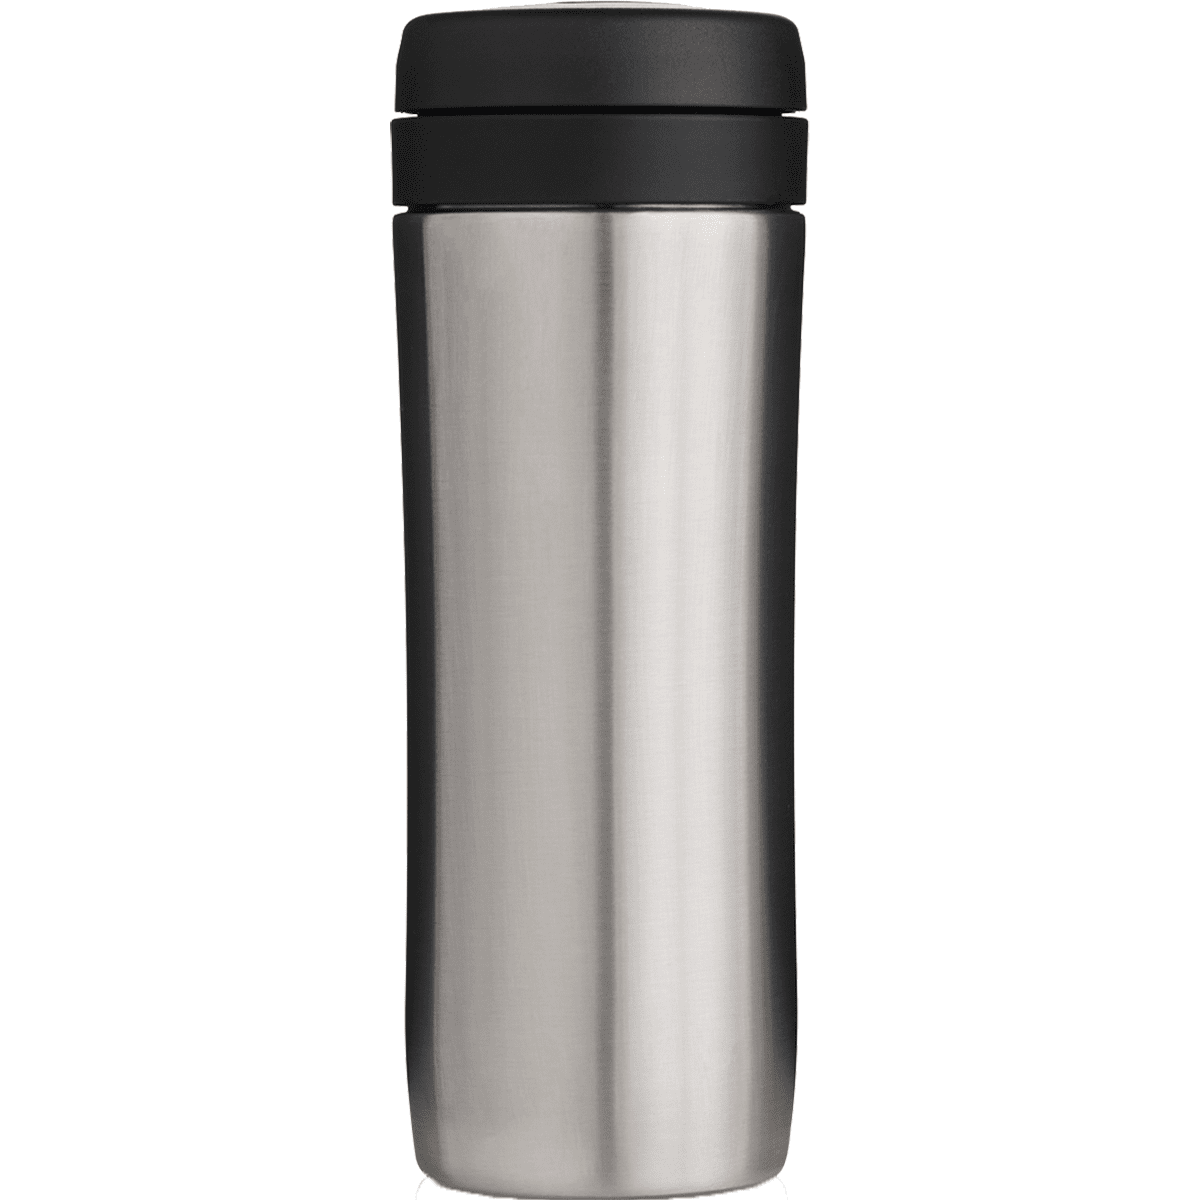 Espro Travel Press for Coffee - 12 oz Brushed Stainless Steel